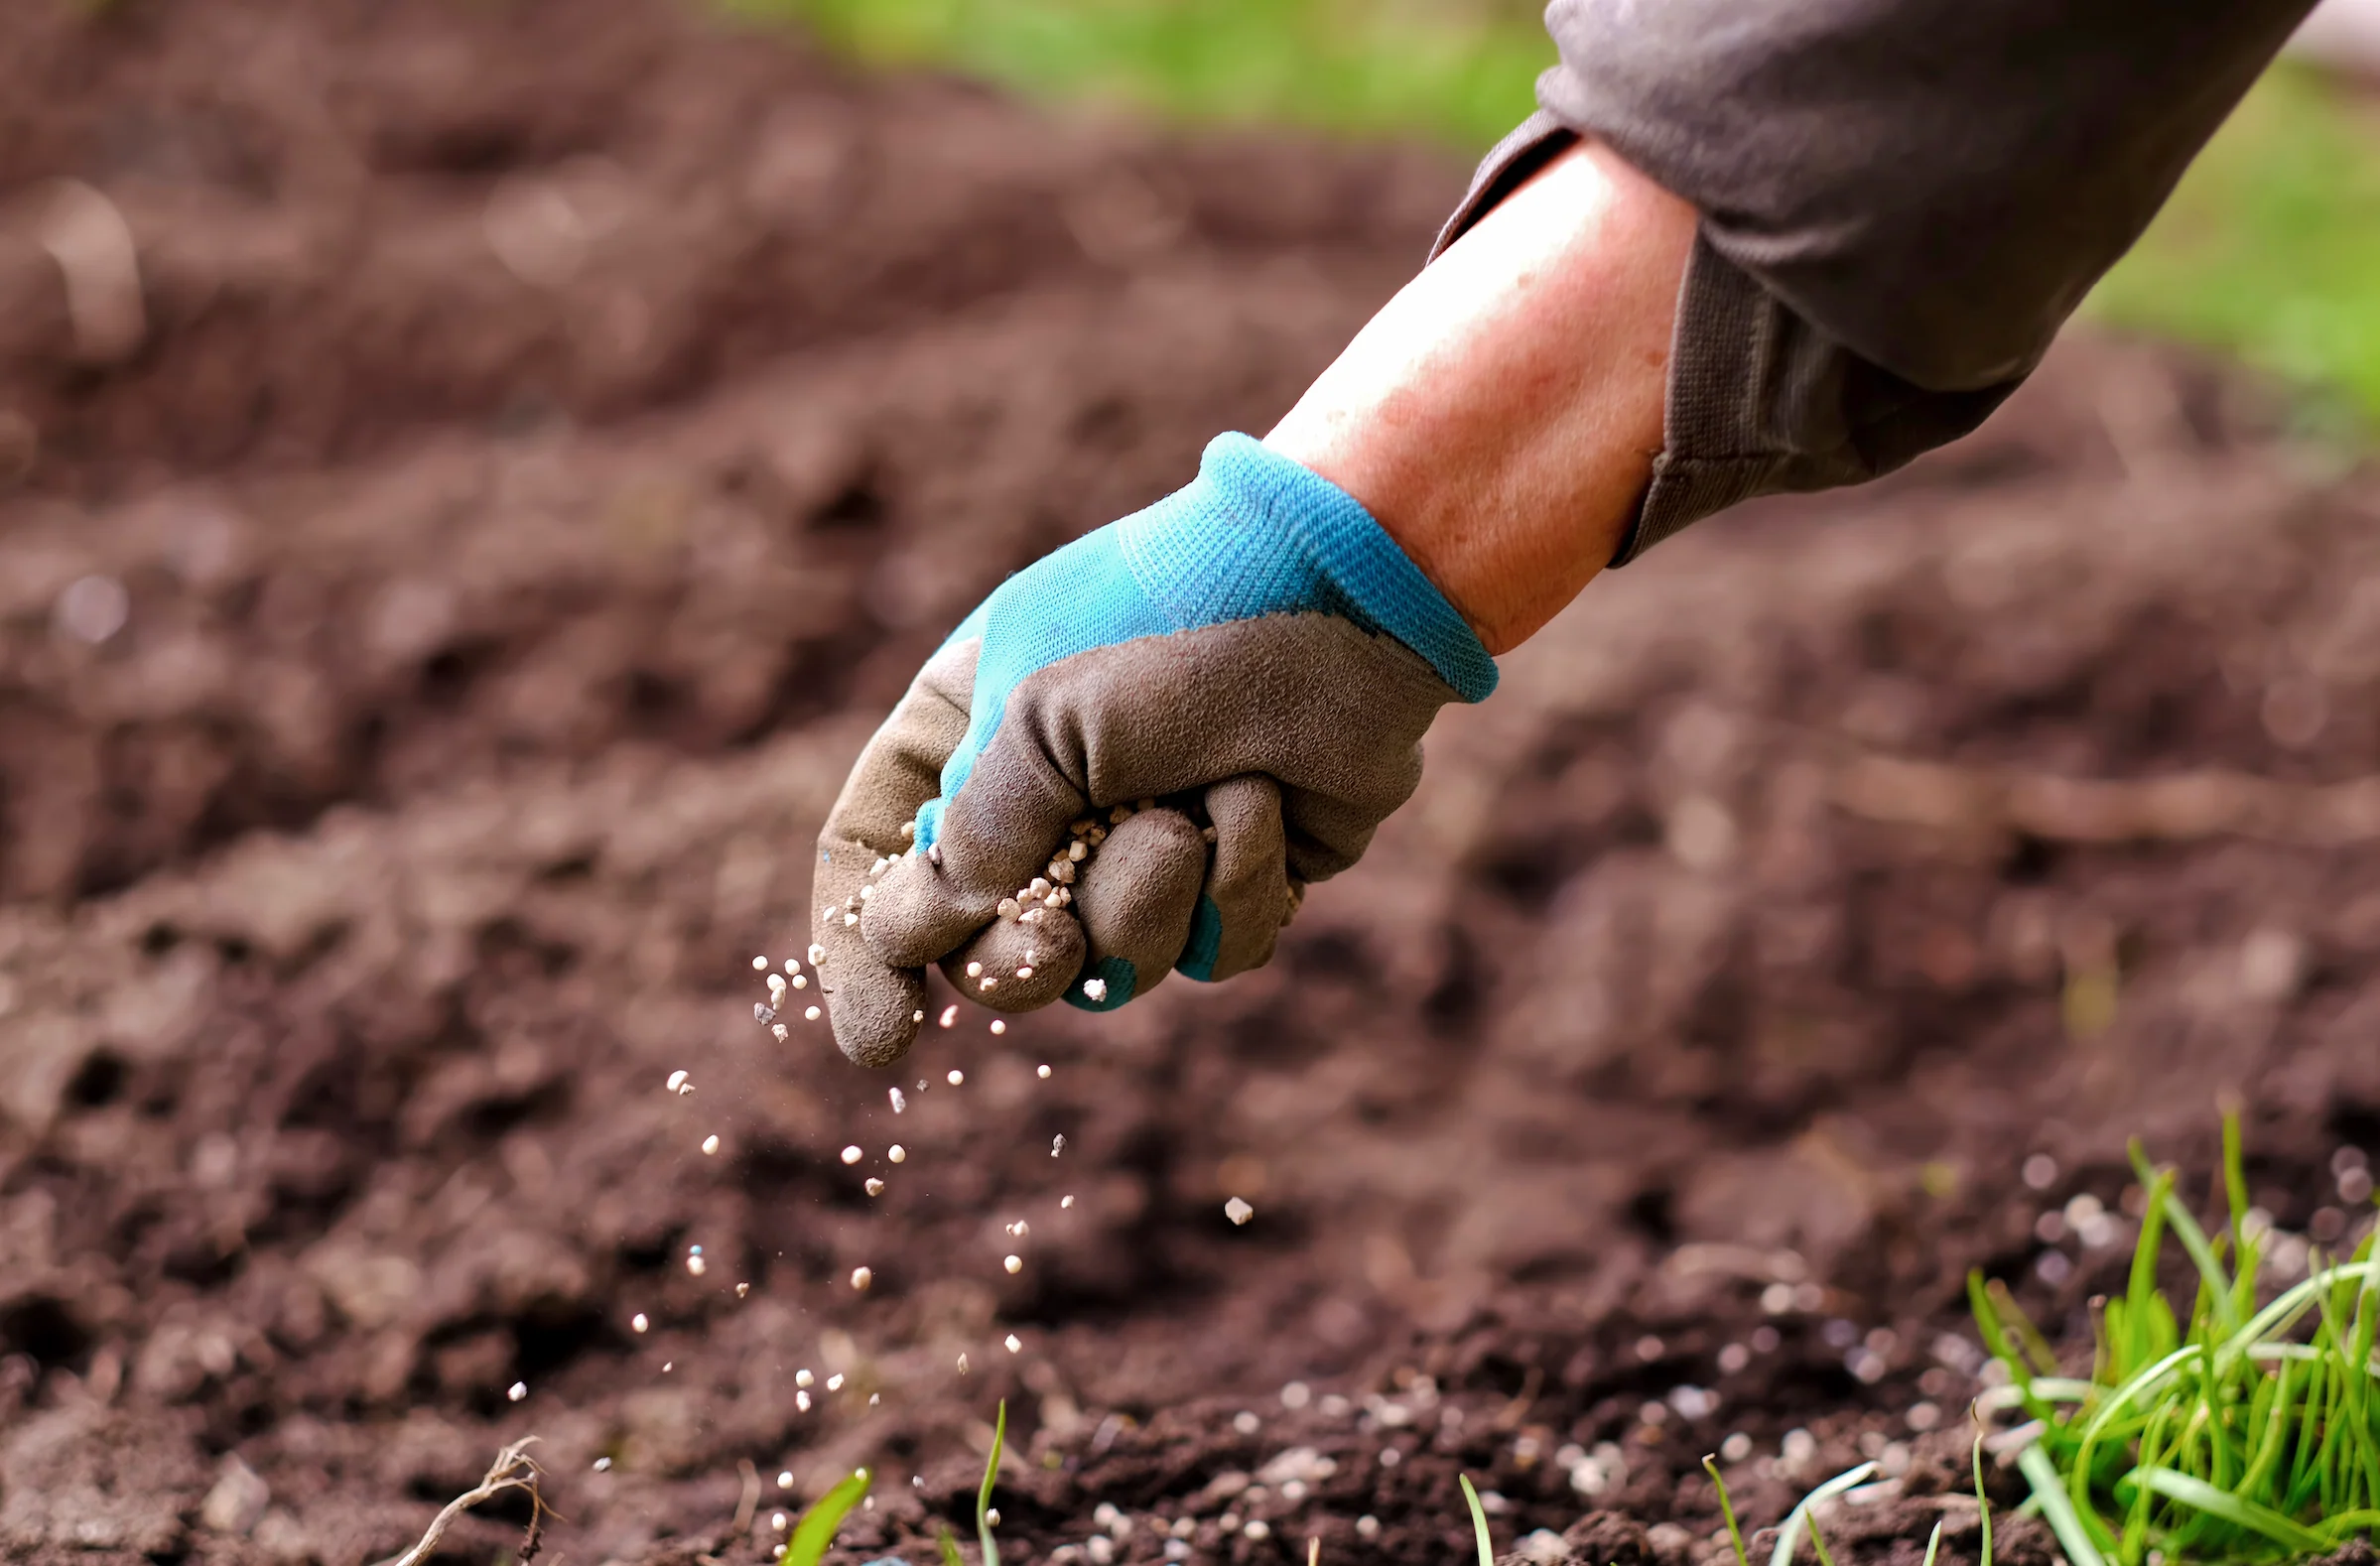 How To Prepare Soil For Planting Grass